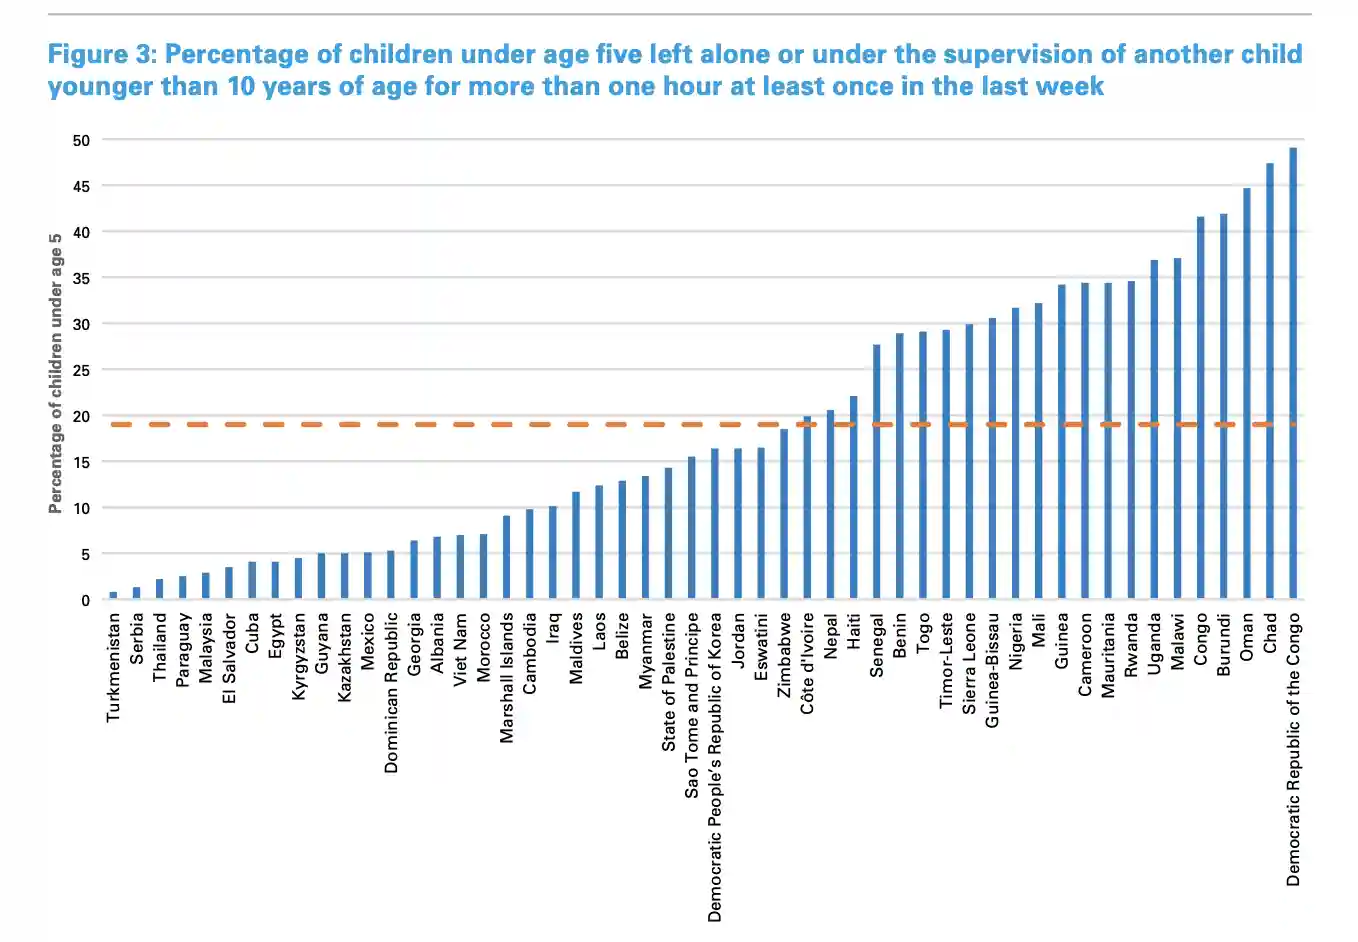 Figure 4 Percentage of children under age five left alone or under the supervision of another child younger than 10 years of age for more than one hour at least once in the last week